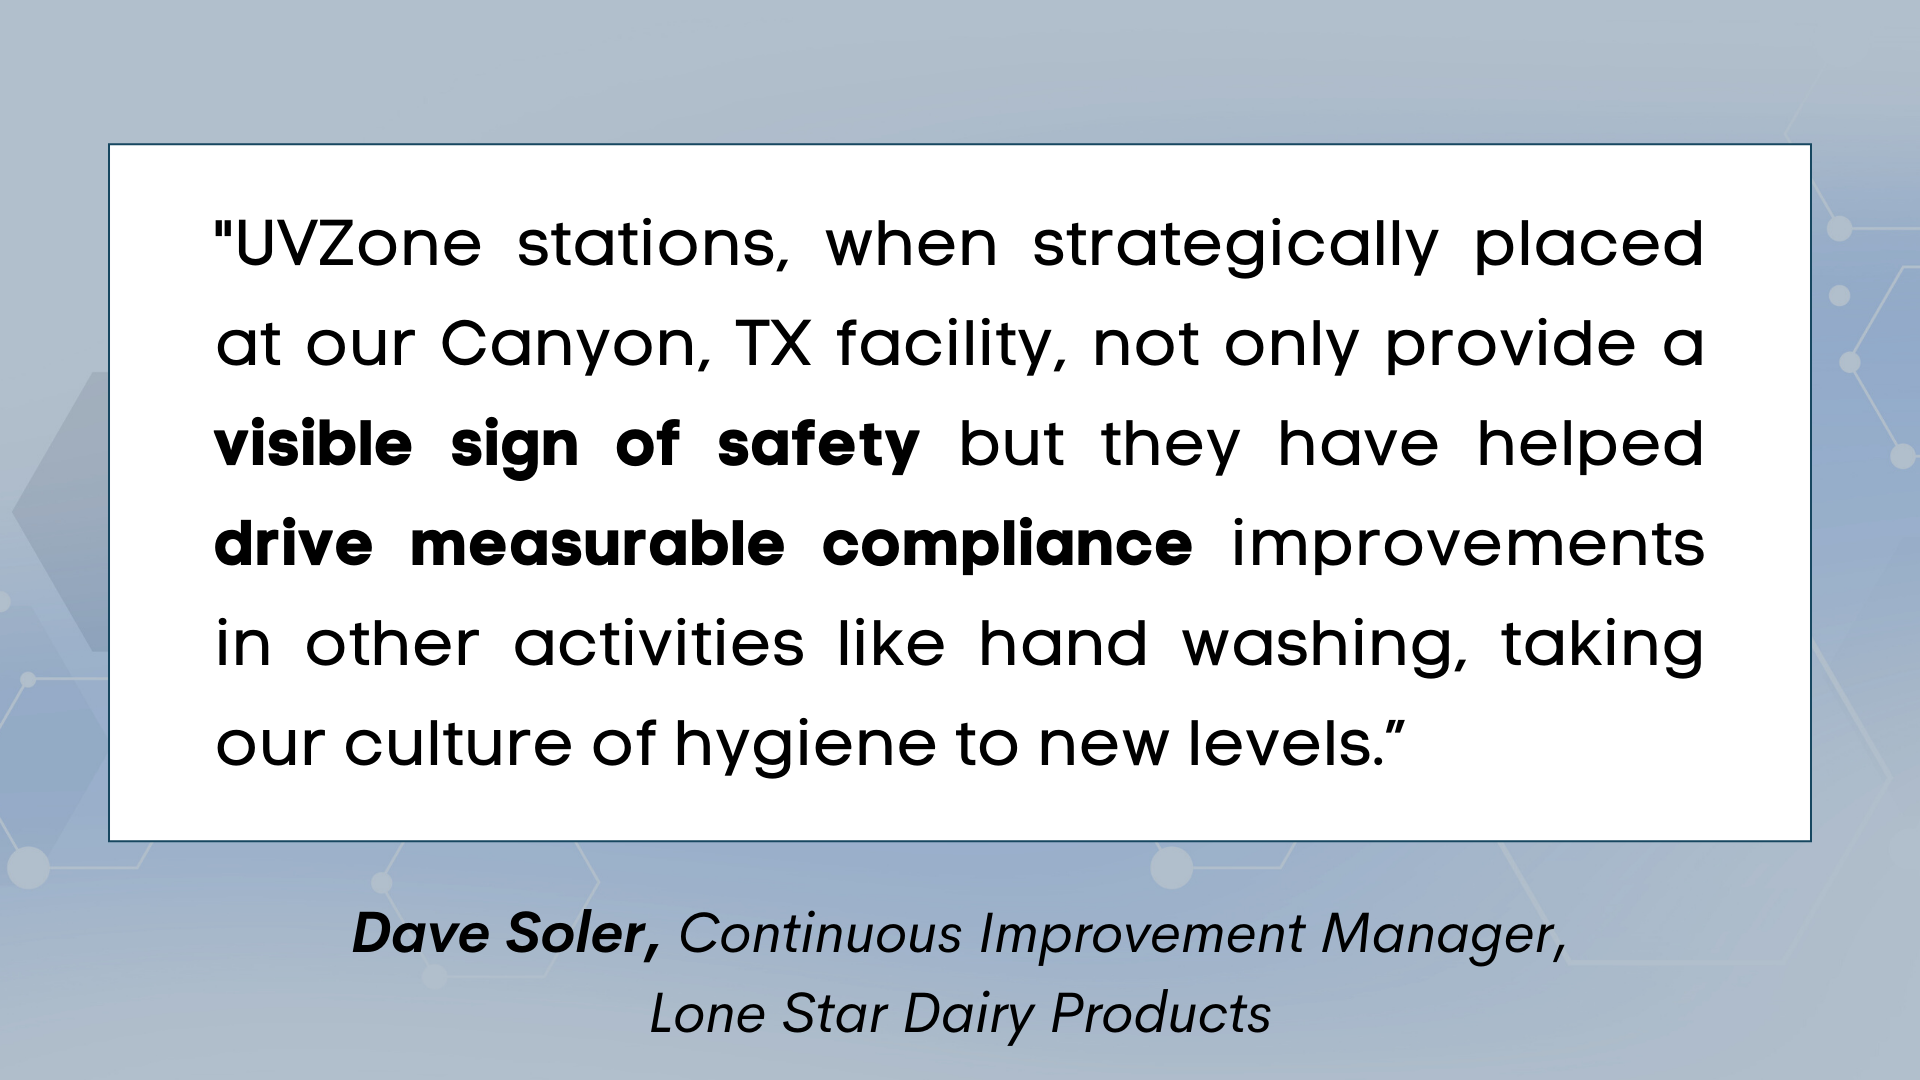 "UVZone stations, when strategically placed at our Canyon, TX facility, not only provide a visible sign of safety but they have helped drive measurable compliance improvements in other activities like hand washing, taking our culture of hygiene to new levels.” 